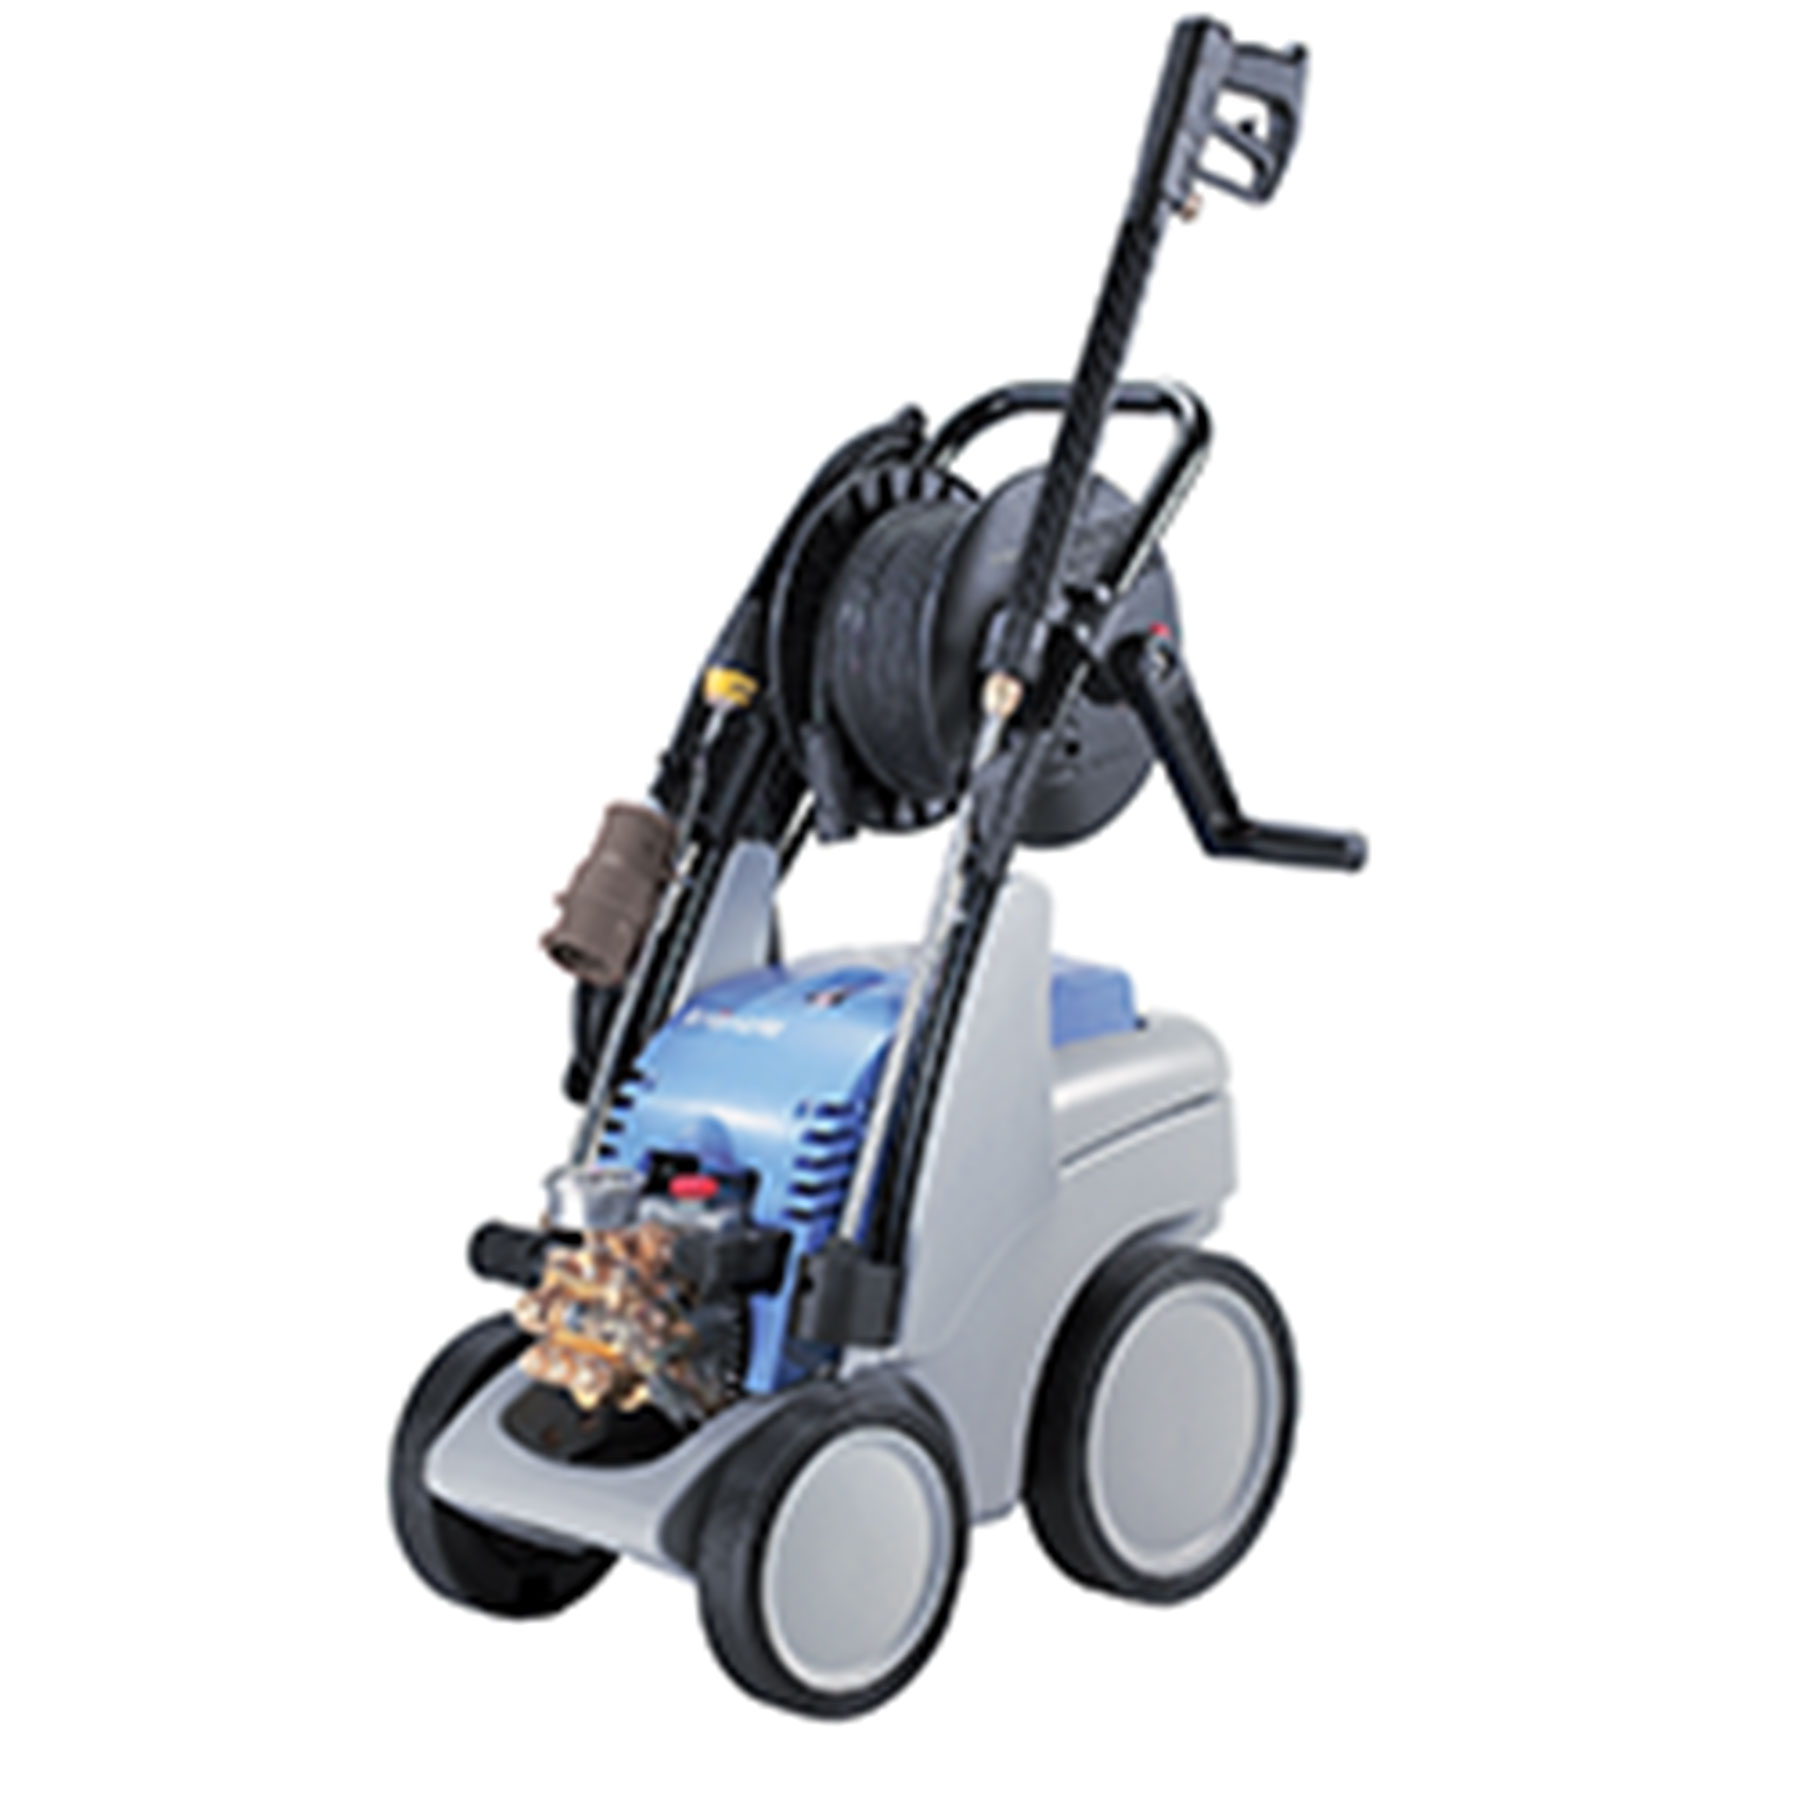 K399tst Pressure Washer, Cold Water, 110v, 15a, Gfi